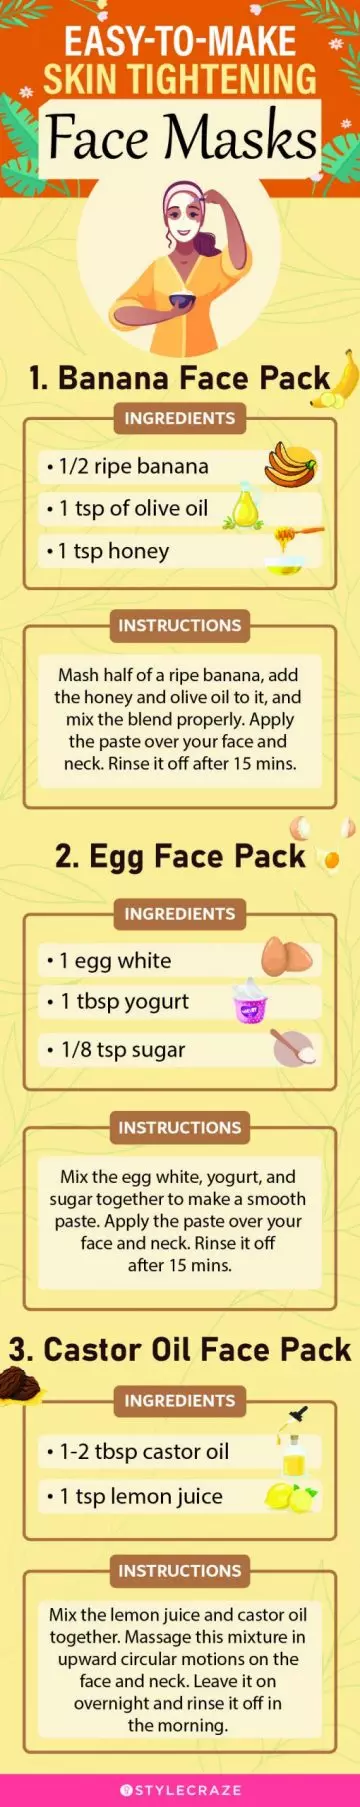 easy to make skin tightening face masks (infographic)